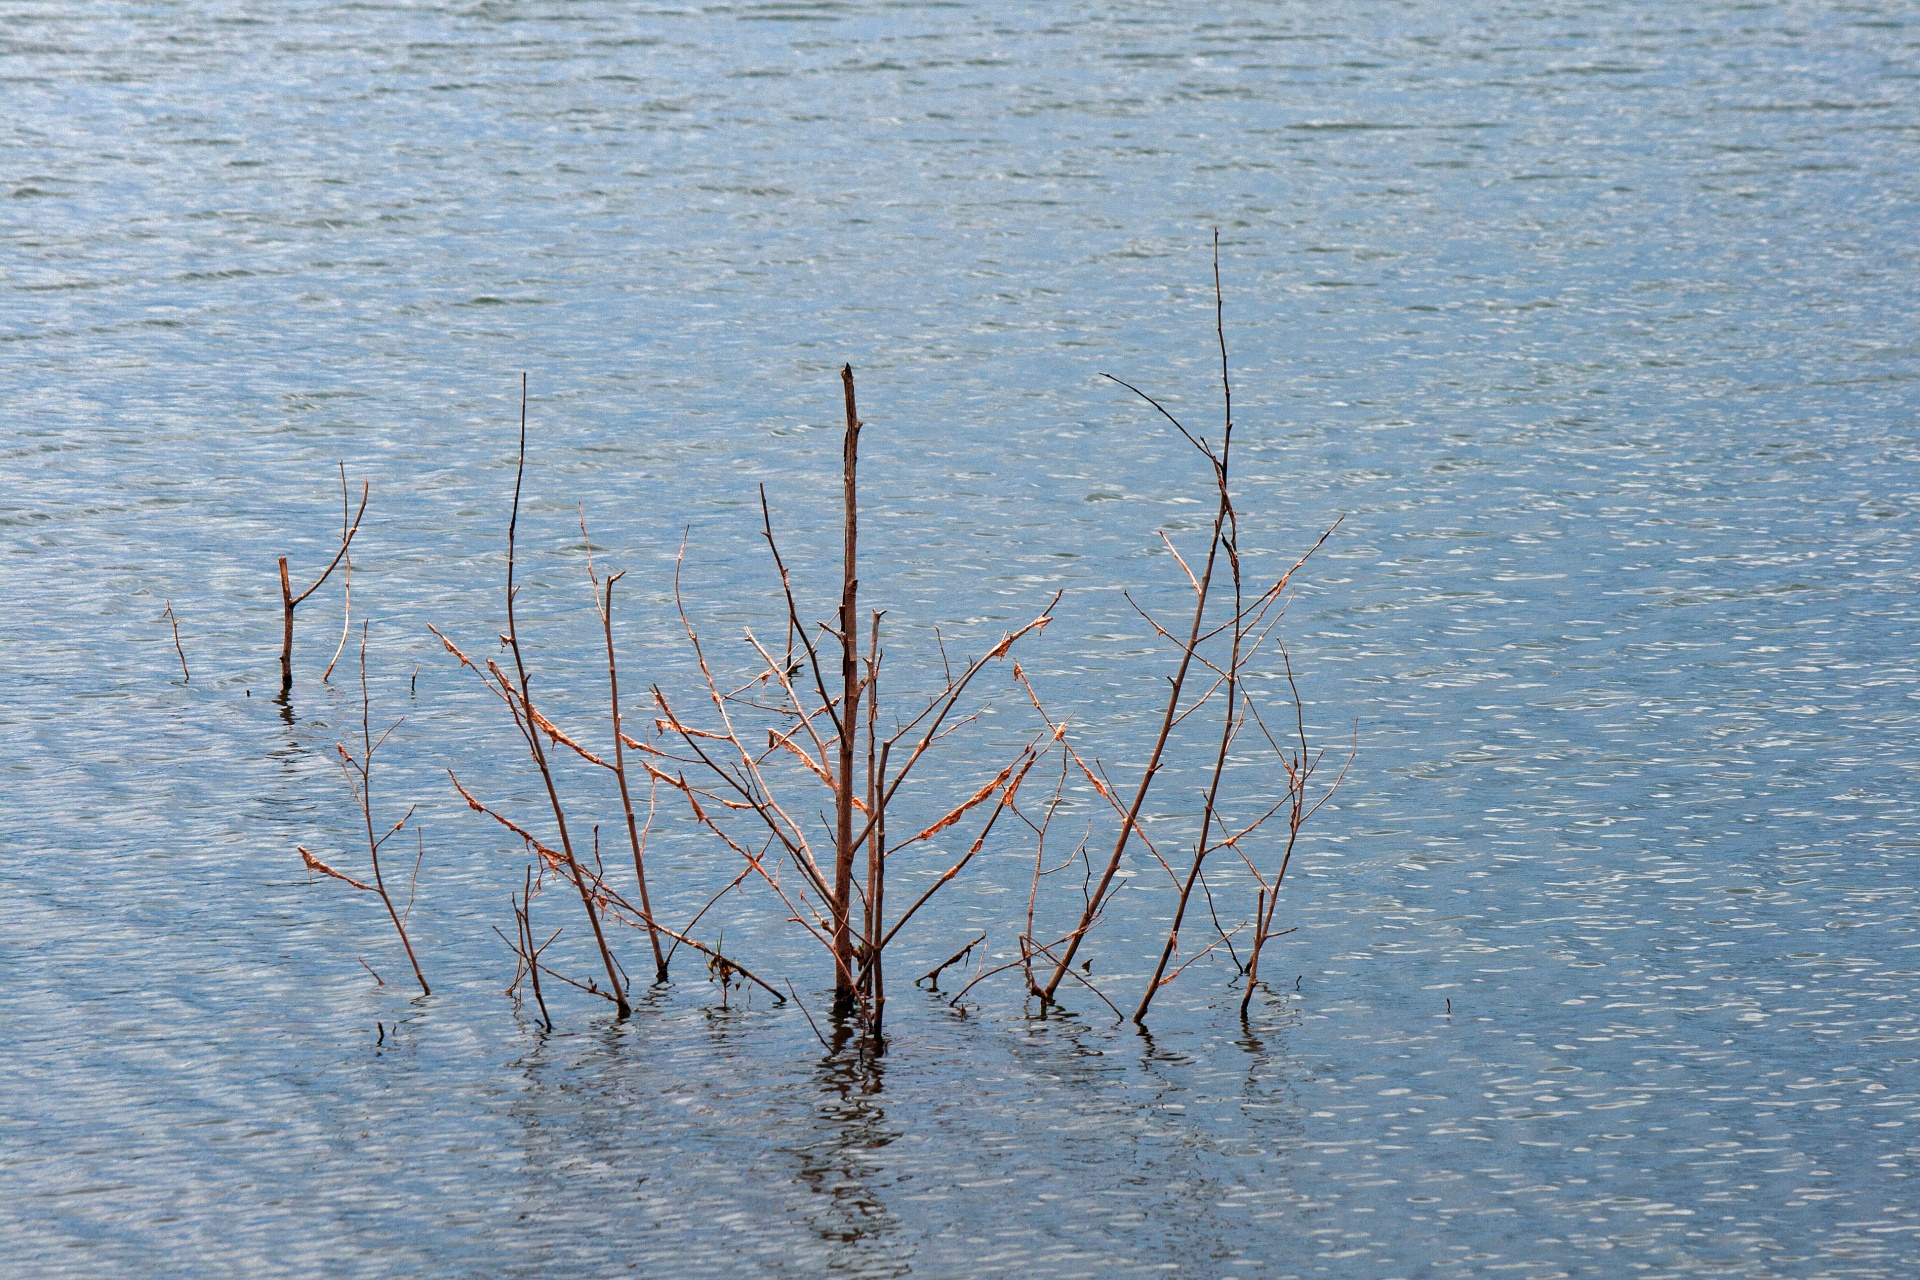 bare branches protruding from water